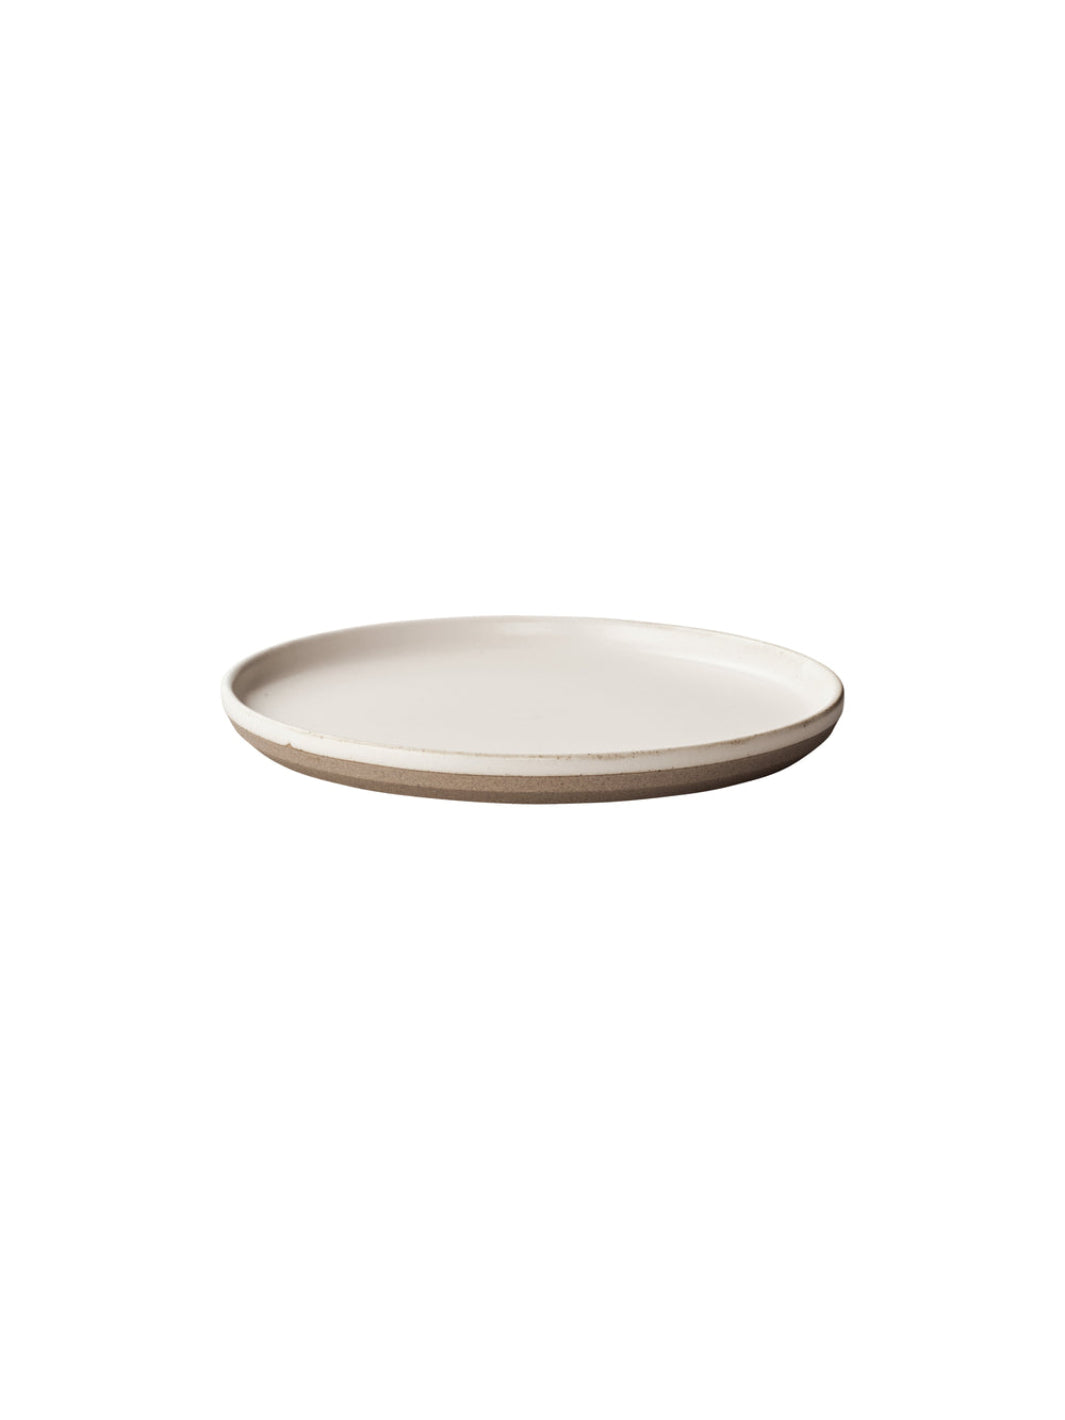 KINTO CERAMIC LAB Plate (200mm/8in) (3-Pack)